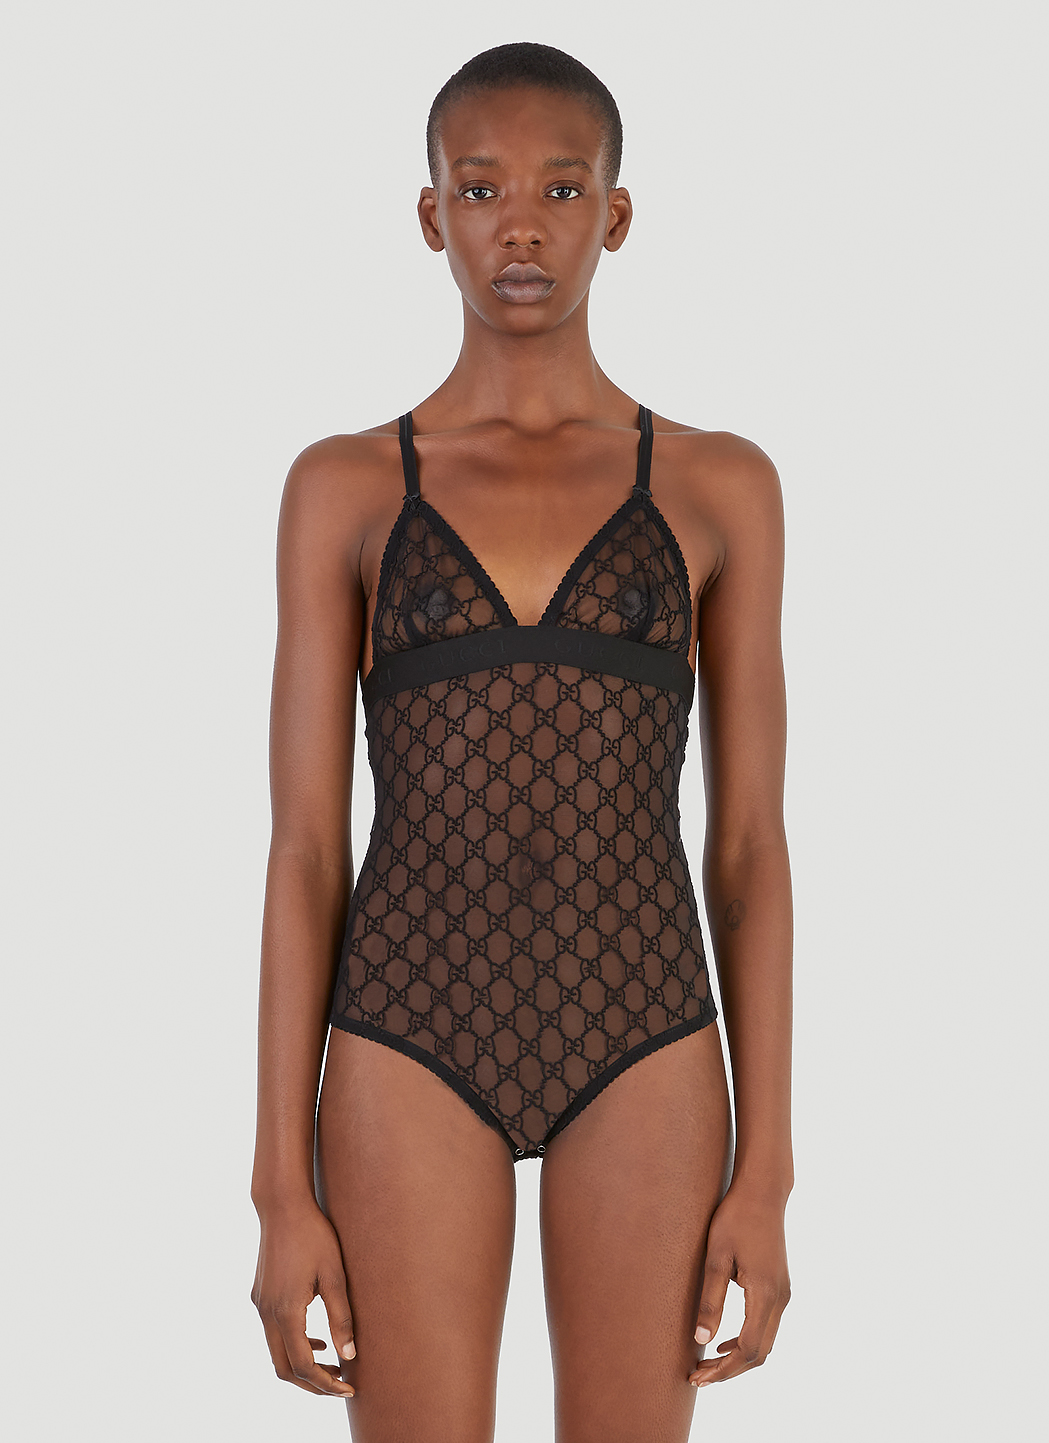 Gucci Tulle Bodysuit  Body suit outfits, Tulle outfit, Casual outfits